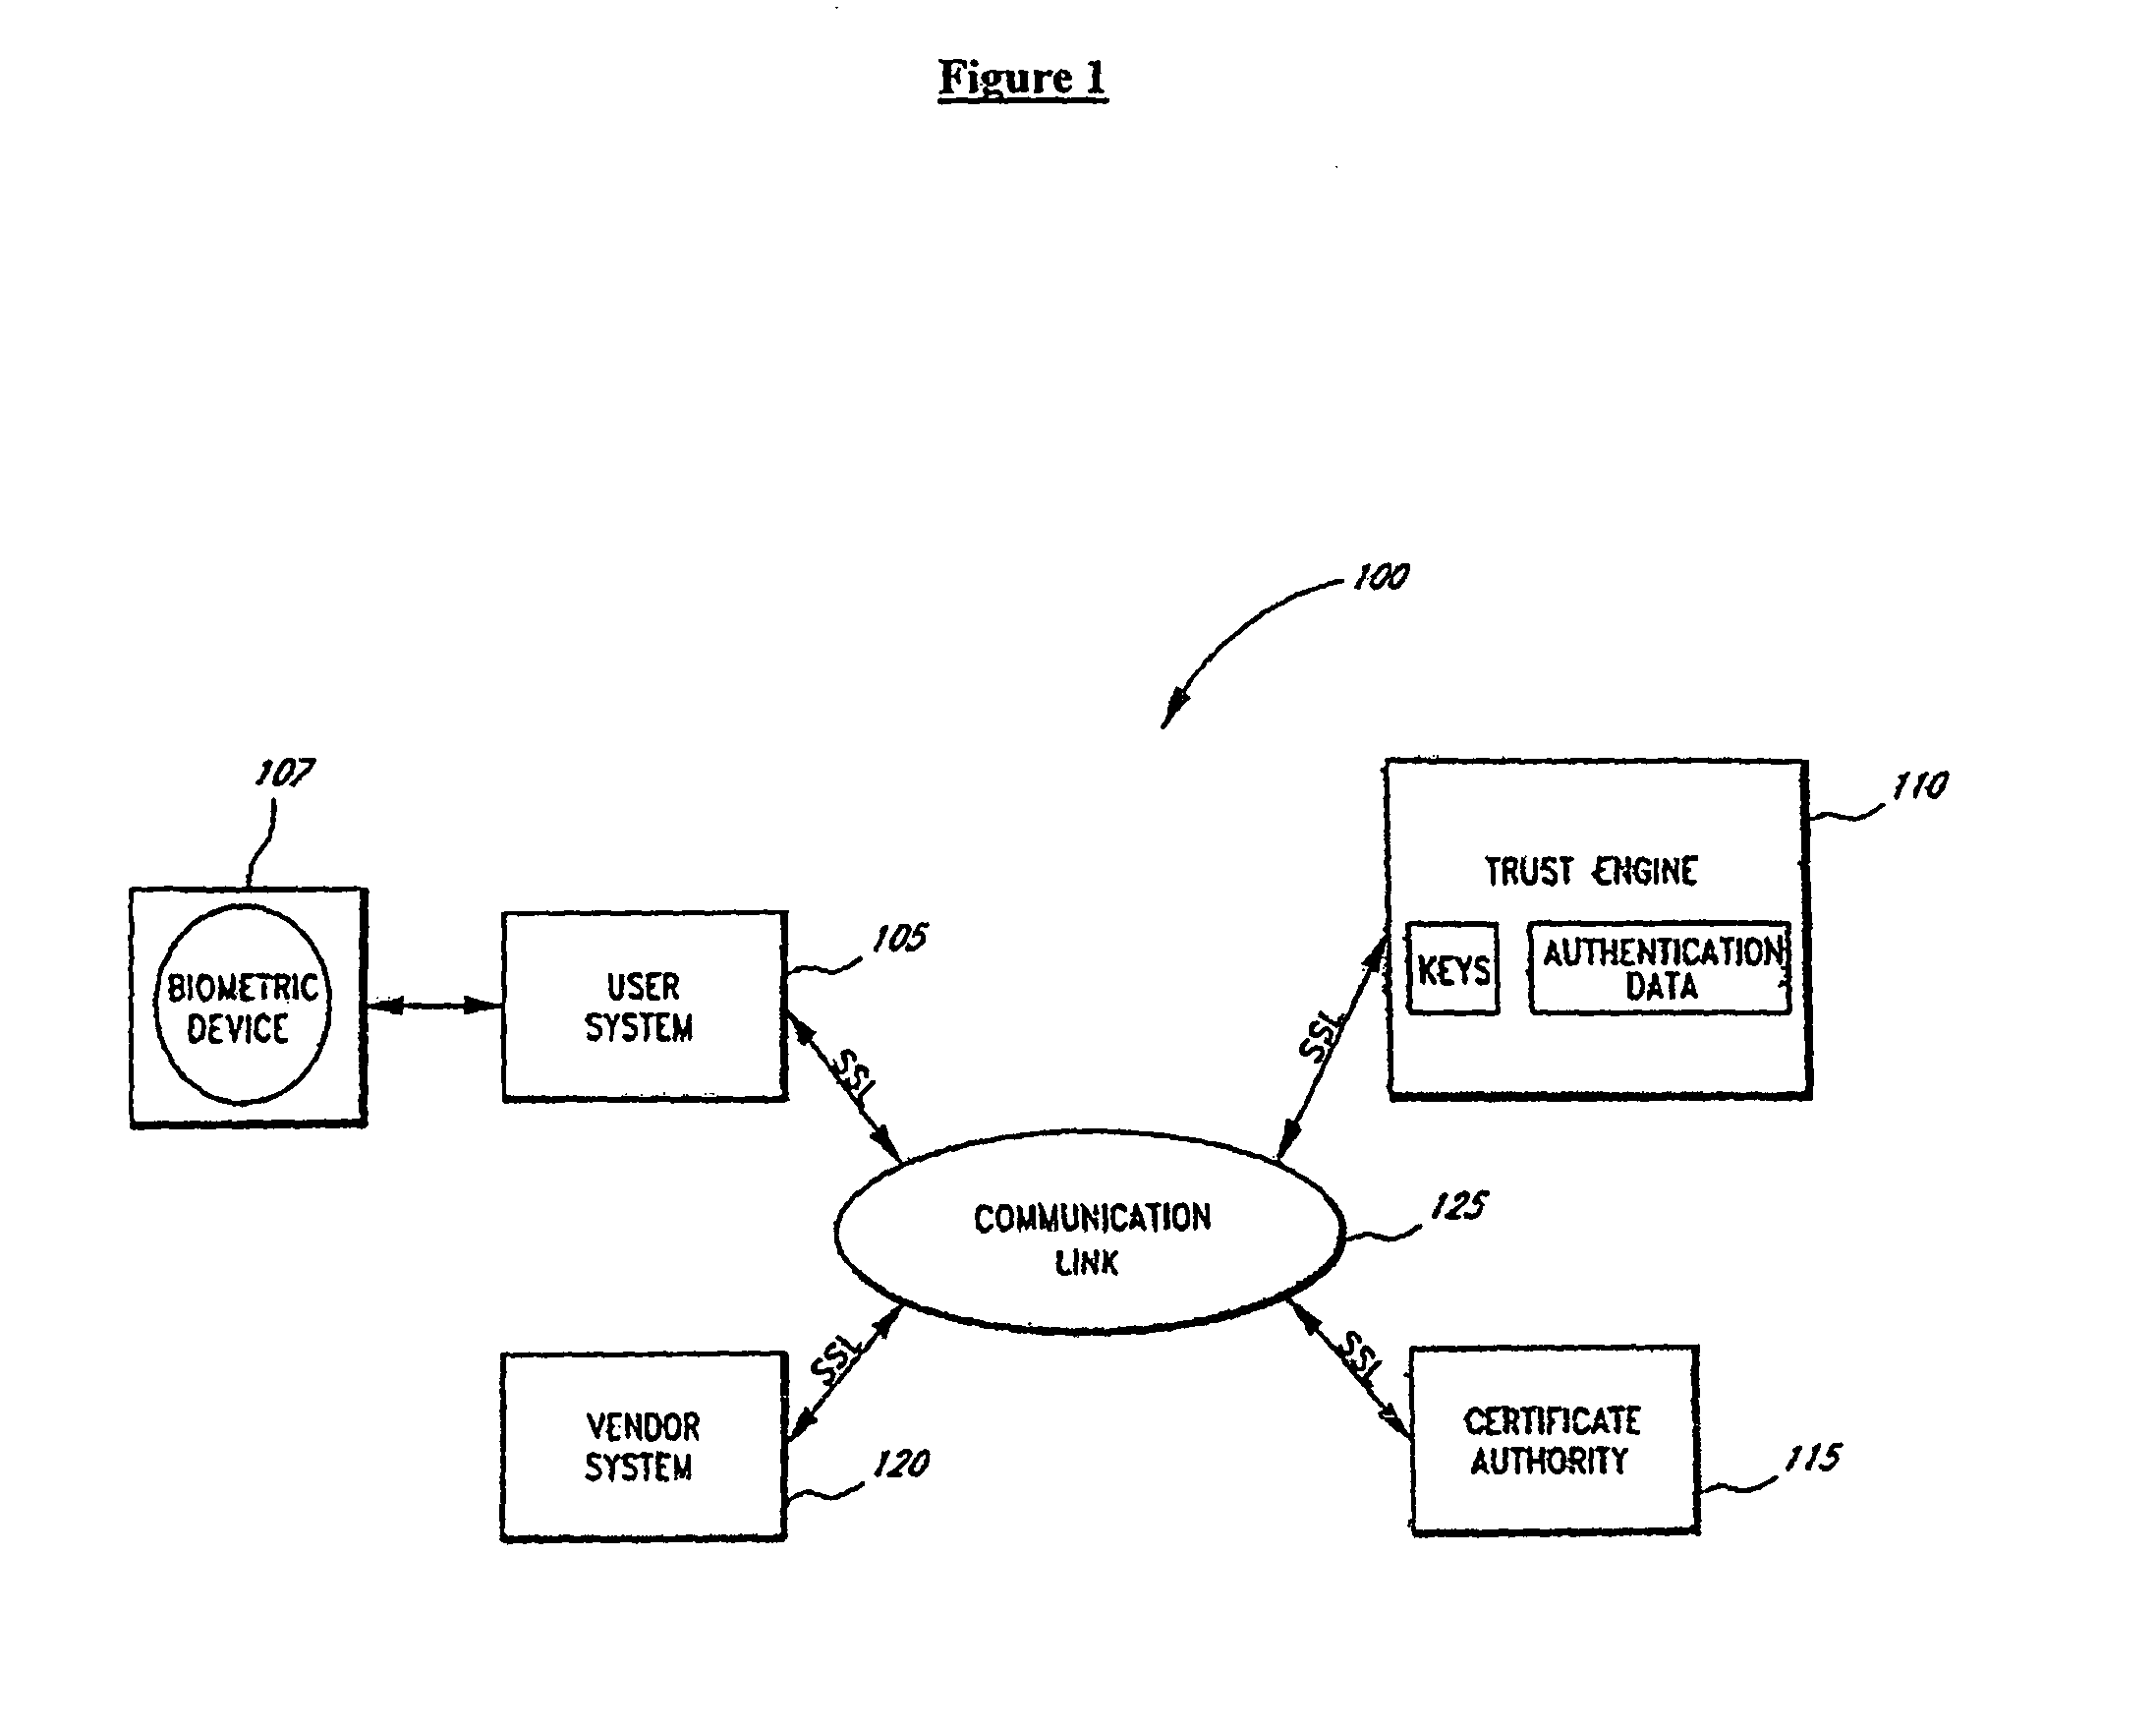 Systems and methods for distributing and securing data